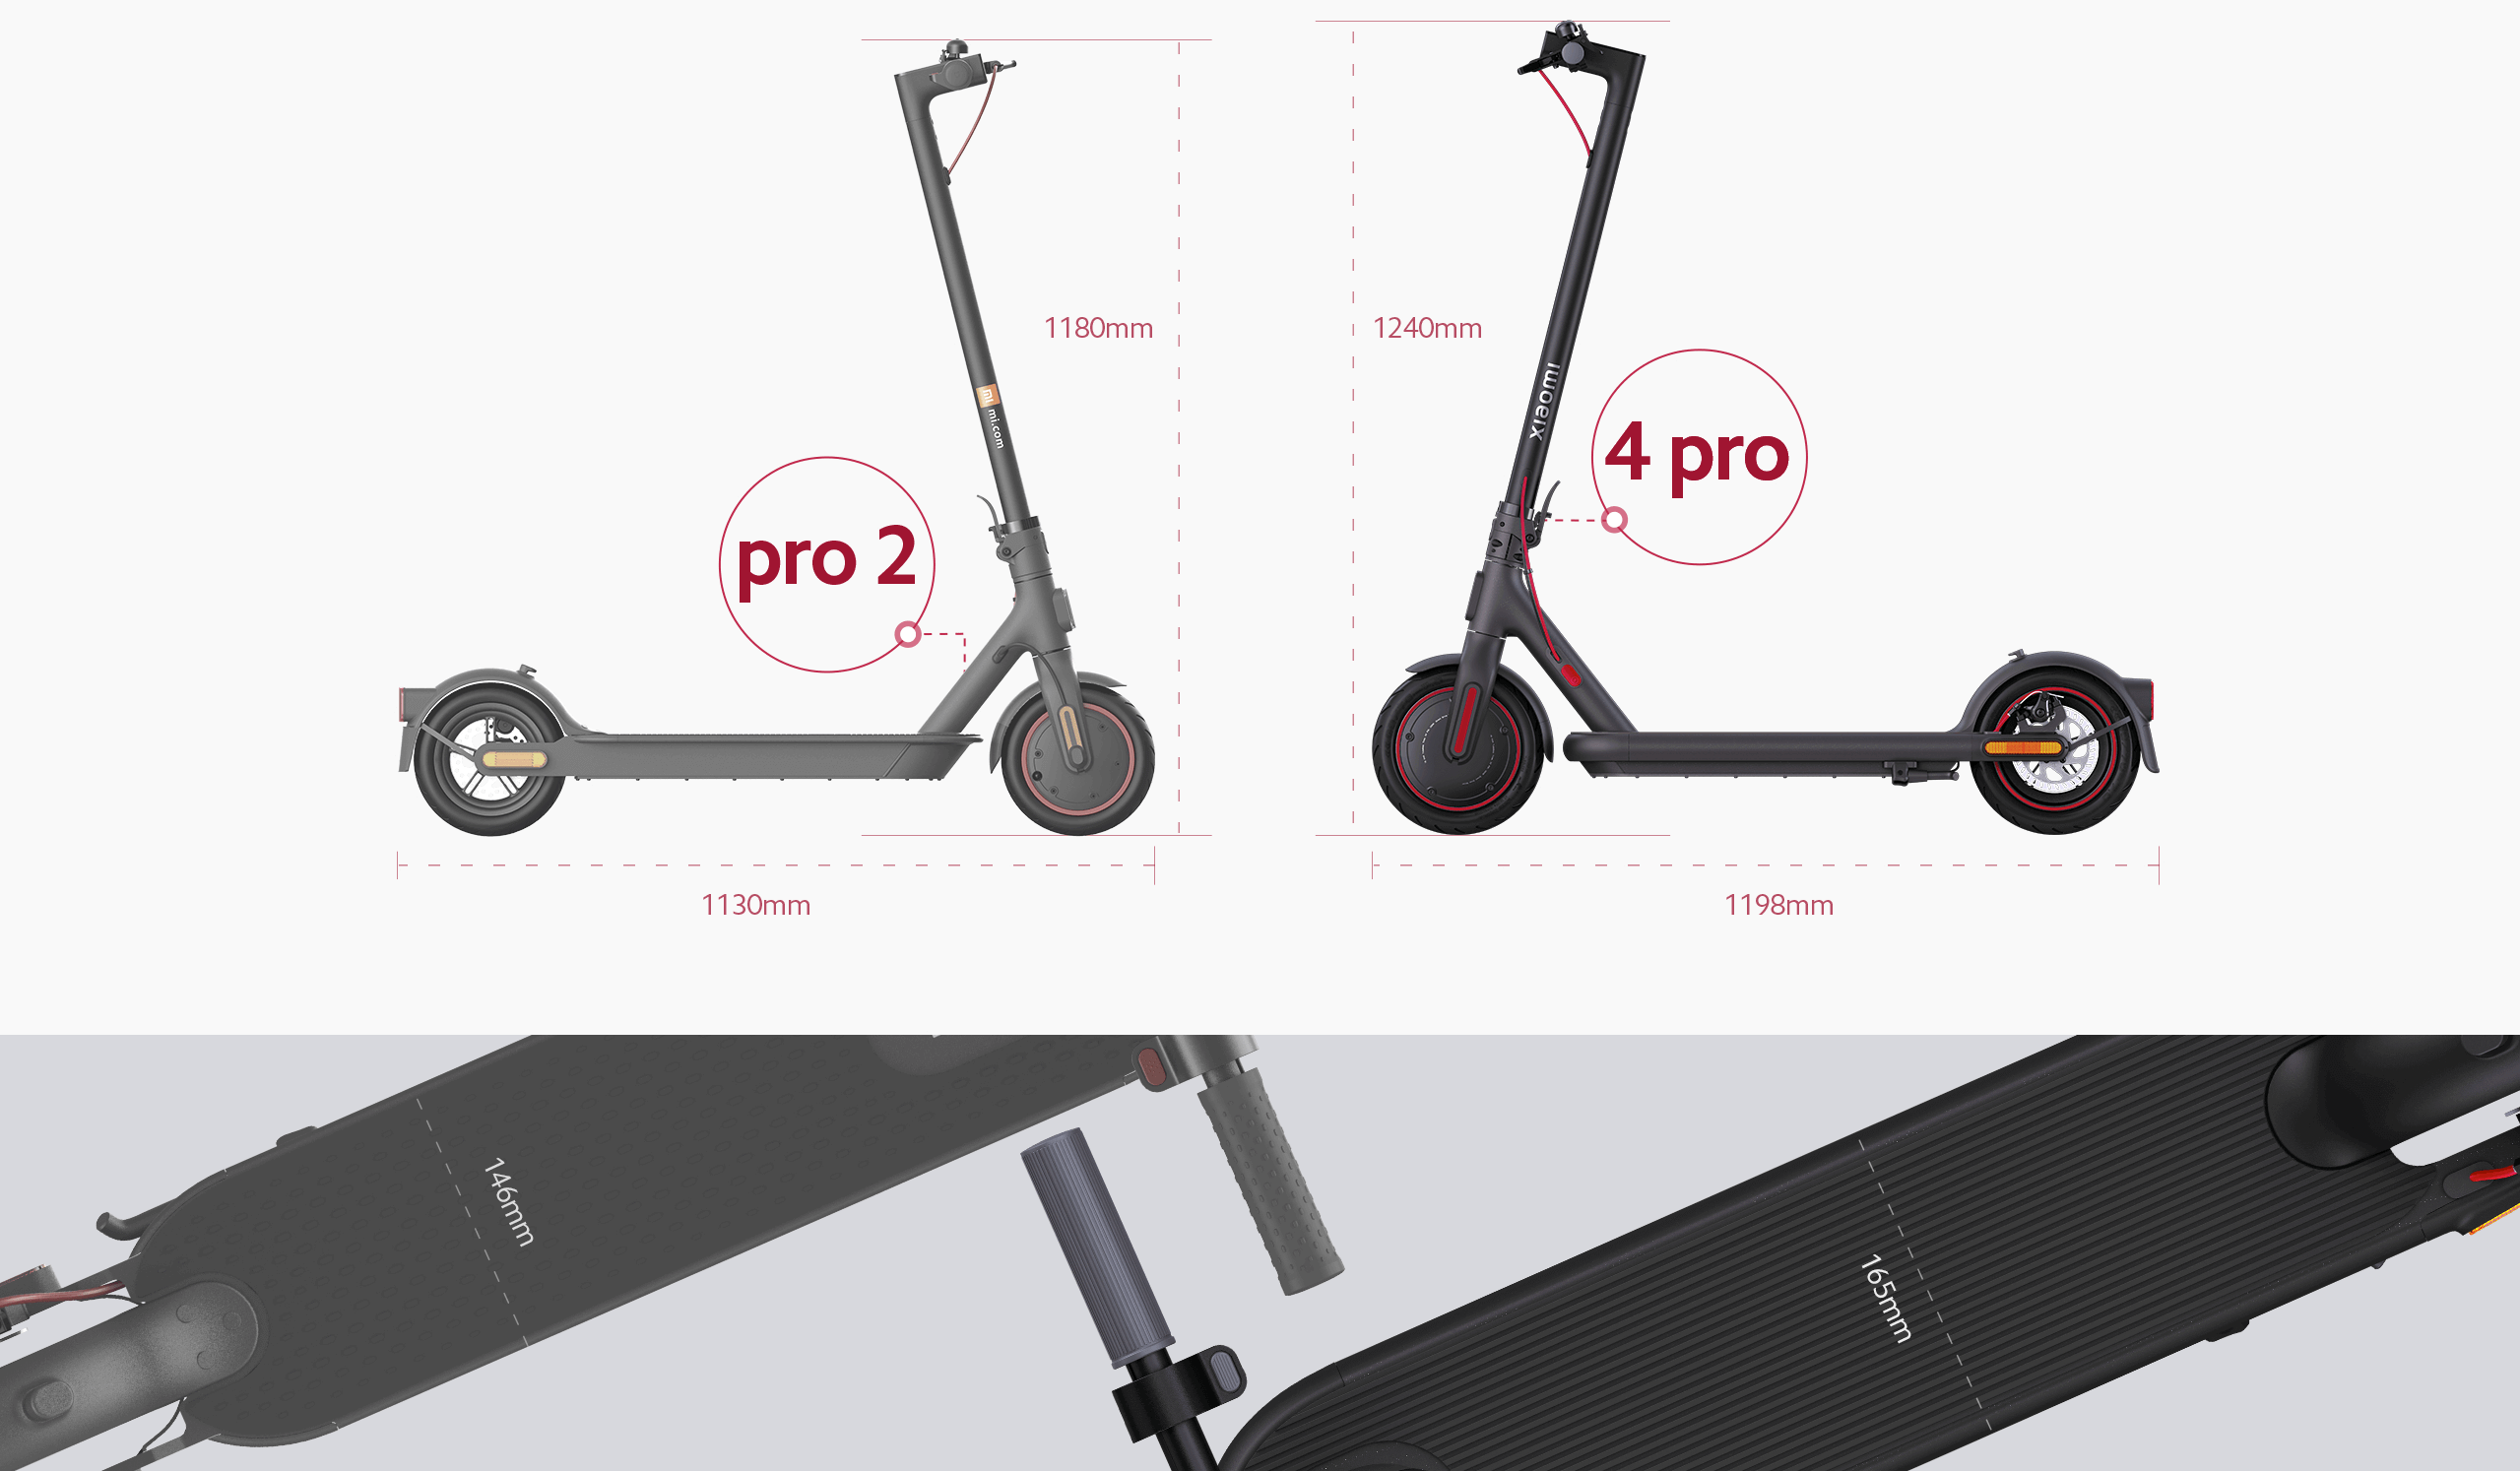 xiaomi electric scooter 4 pro vs scooter pro 2